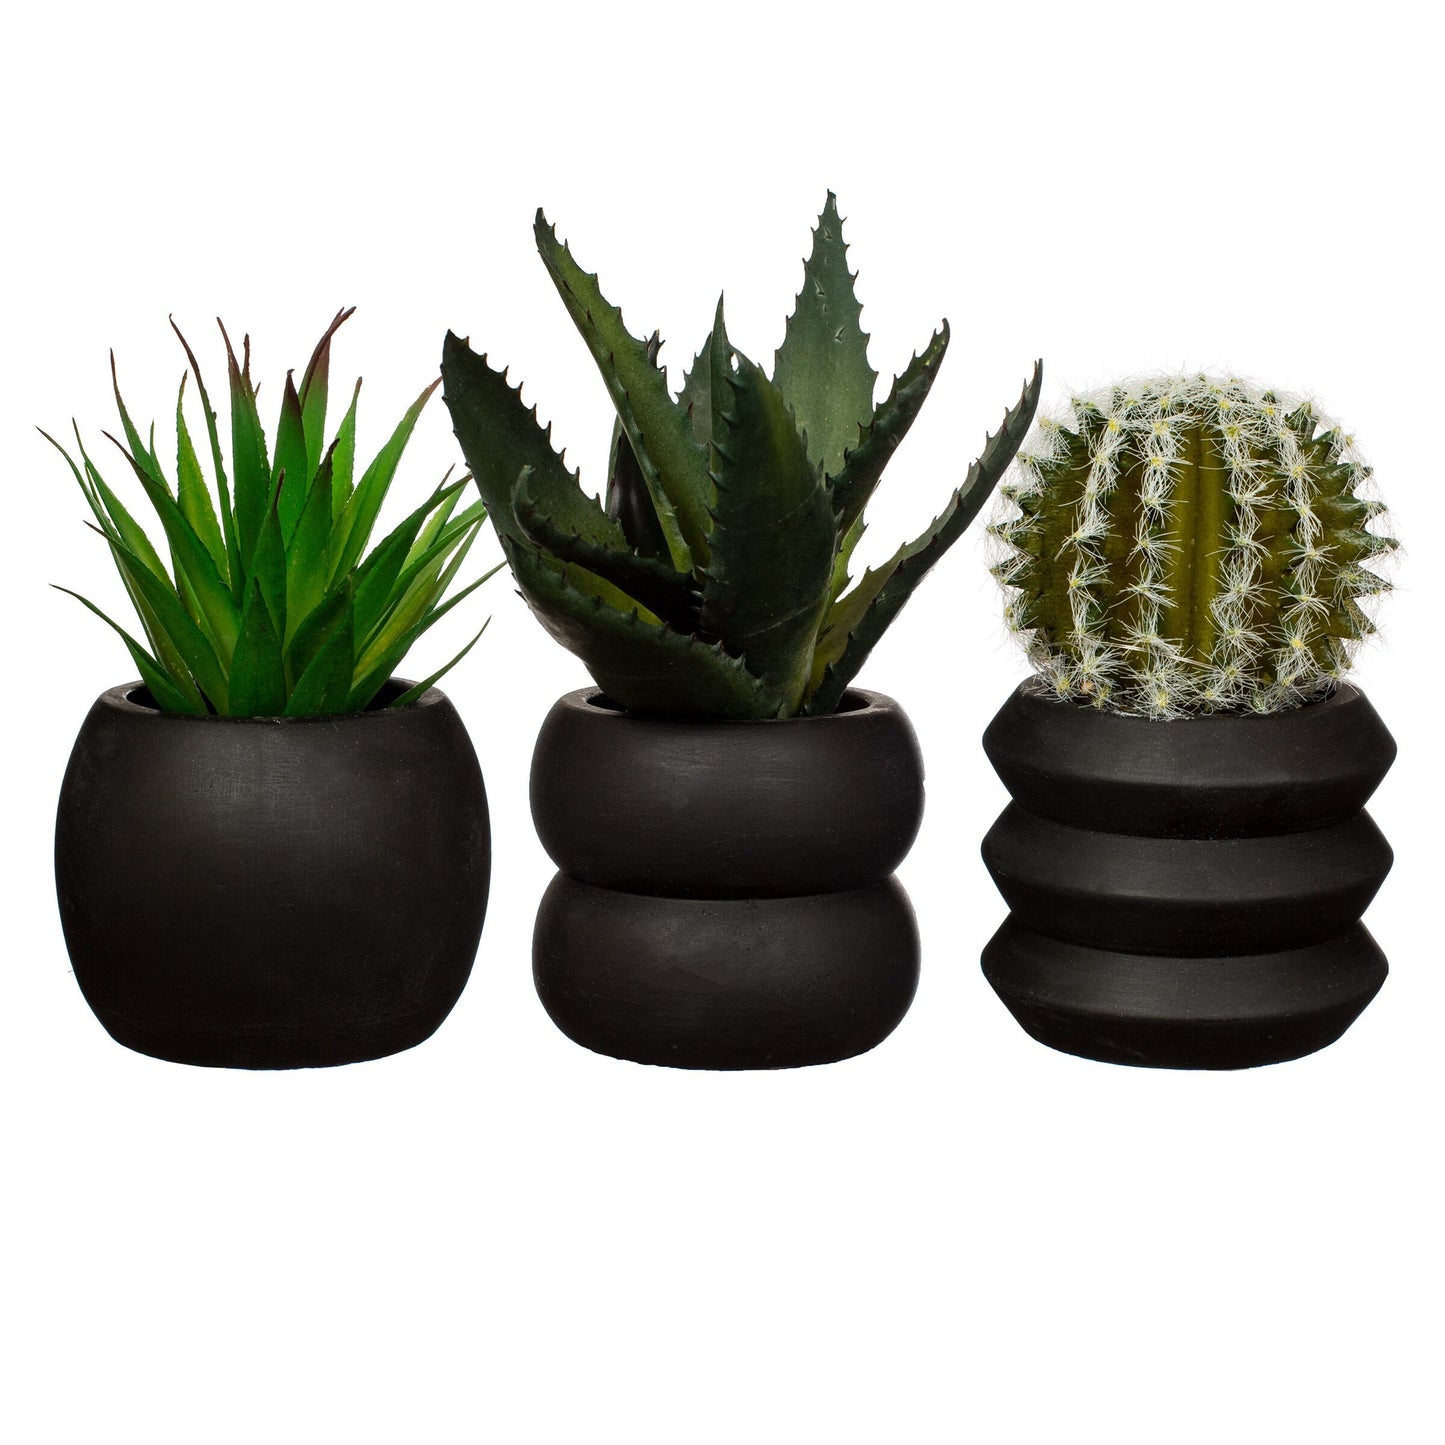 Black Cement Planter With A Succulent Or Cactus